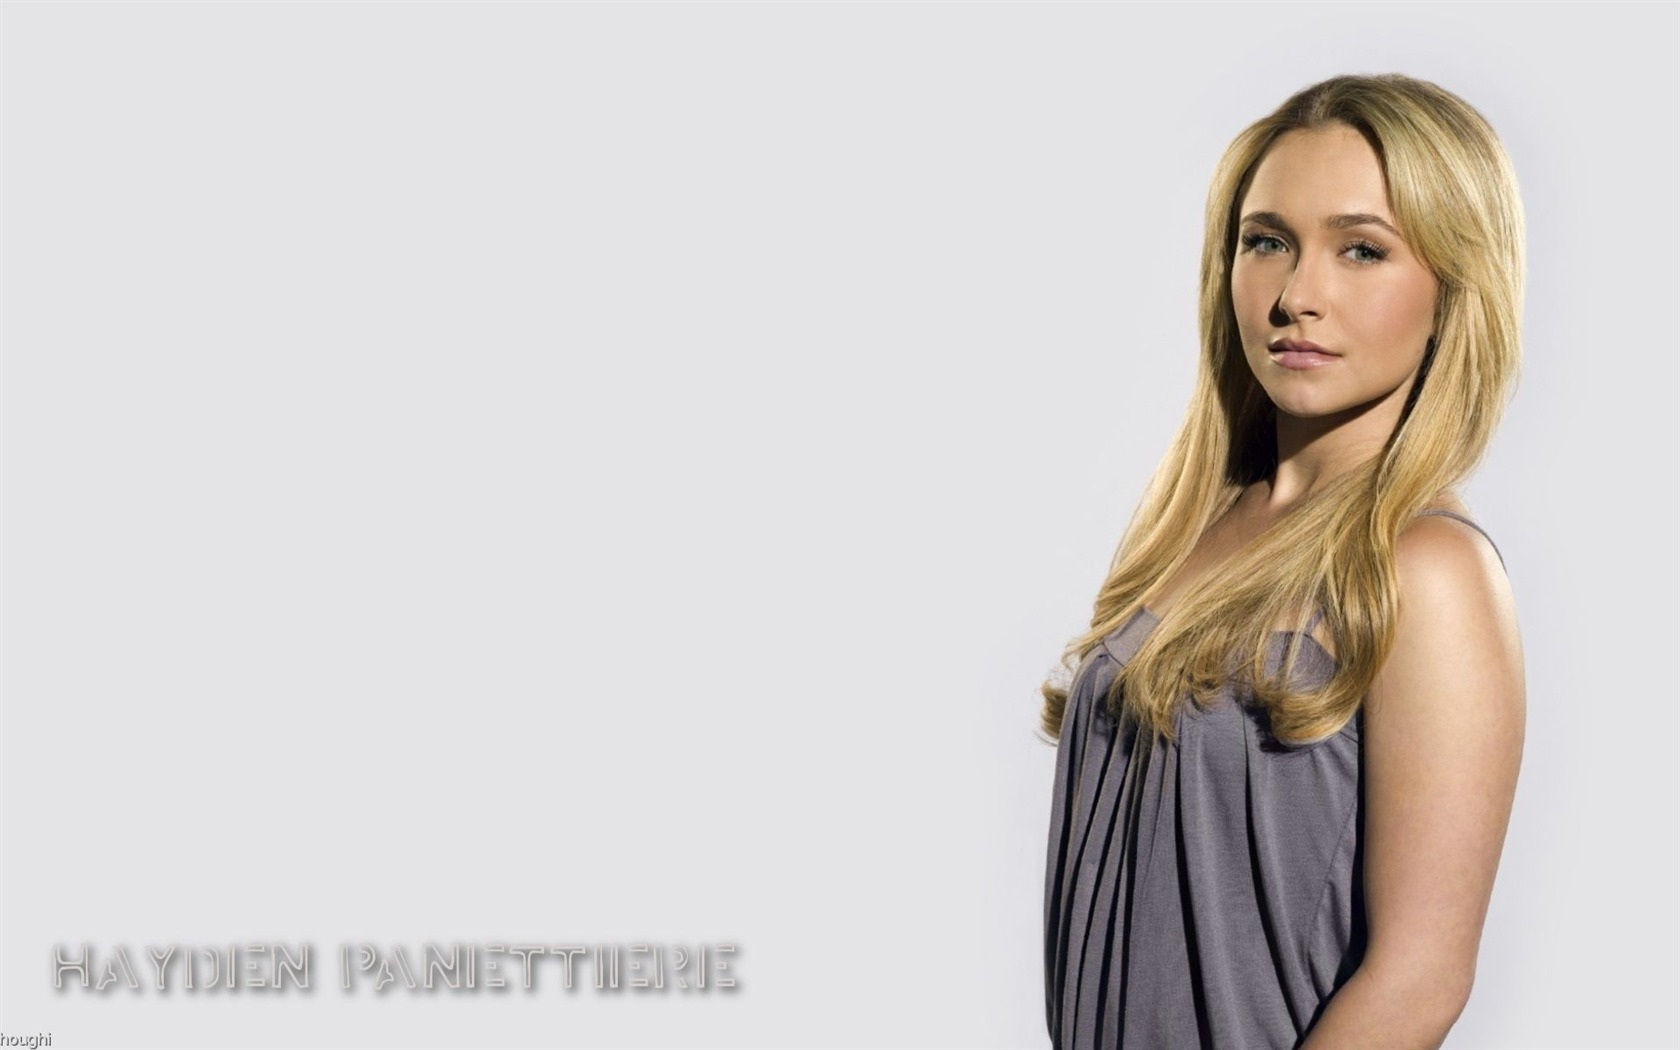 Hayden Panettiere #004 - 1680x1050 Wallpapers Pictures Photos Images